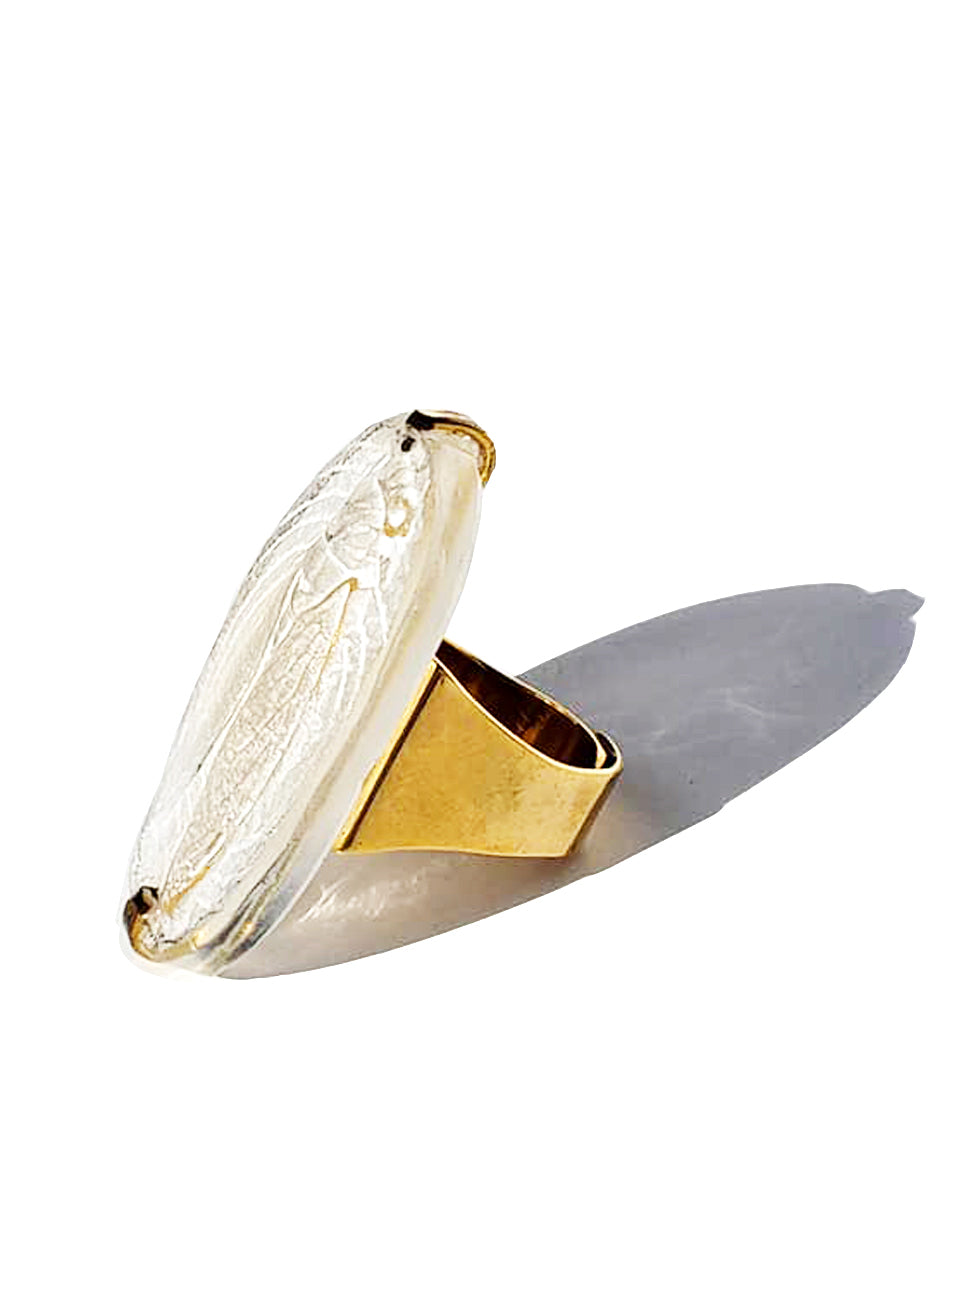 Ring Hand Cast French Glass Beetle Oval Gold Plated Band